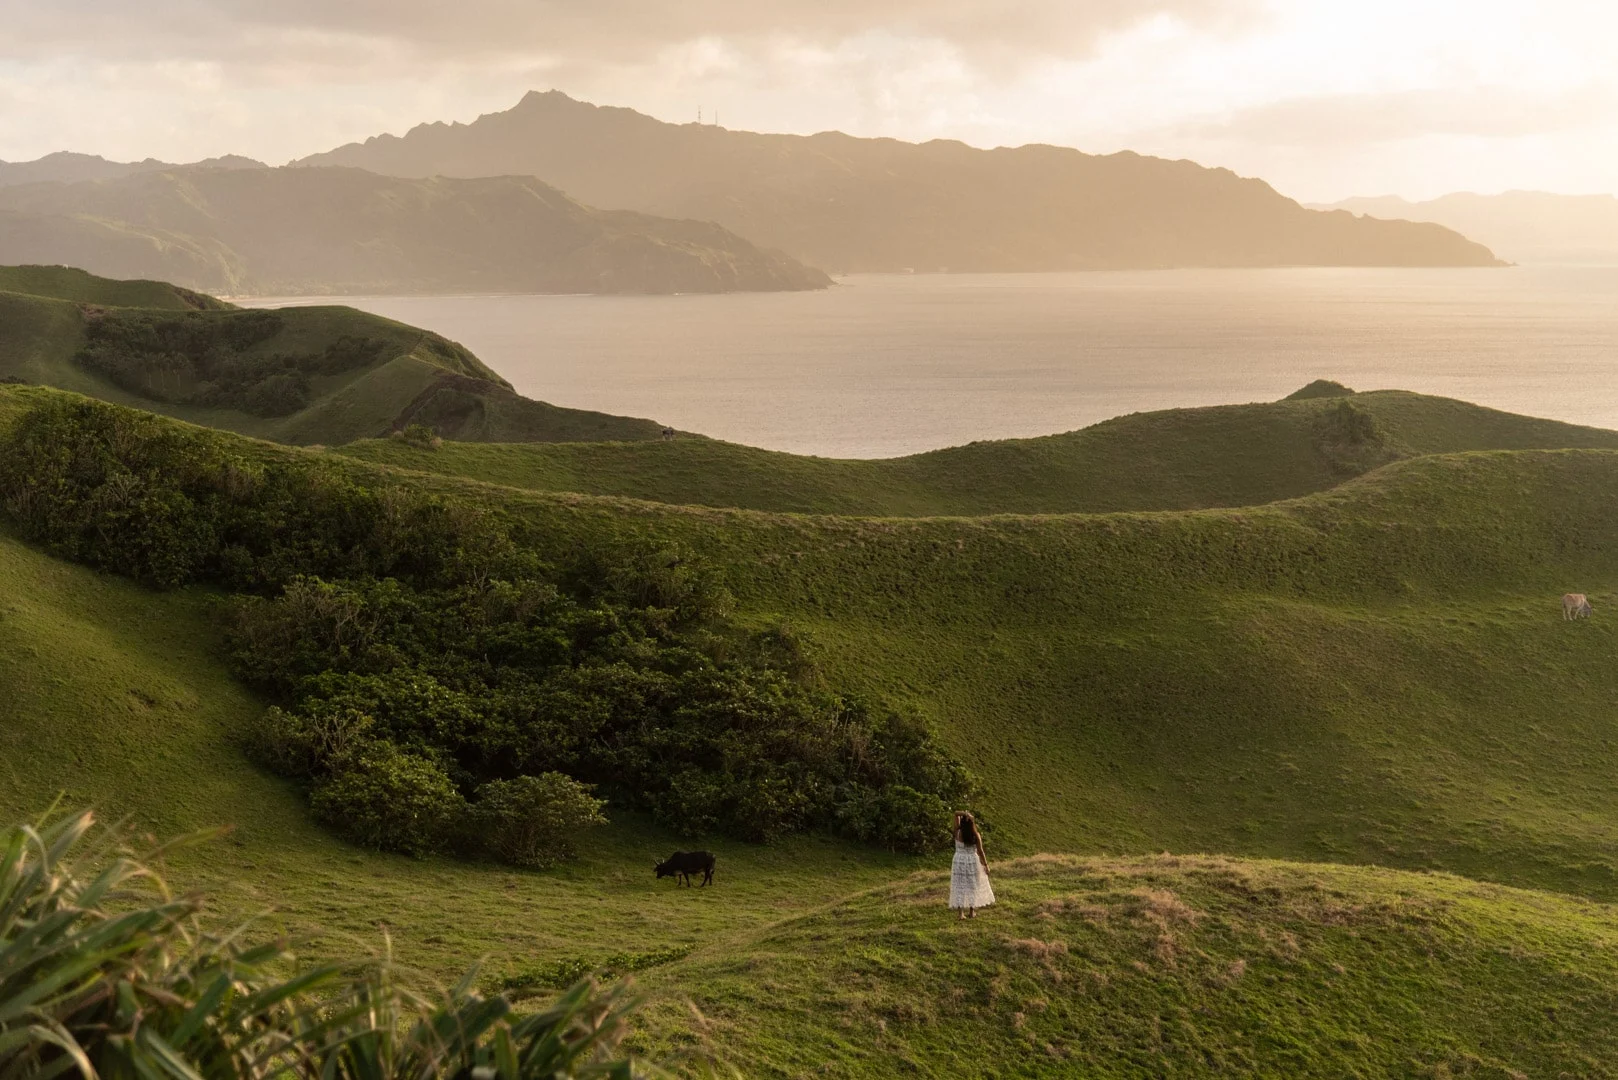 batanes itinerary, batanes travel itinerary, Rolling Hills, sunset at Rolling Hills, Transportation around Batanes, Batanes tourist spots, atms in batanes, wifi connection in batanes, how to go to Batanes, Rolling Hills